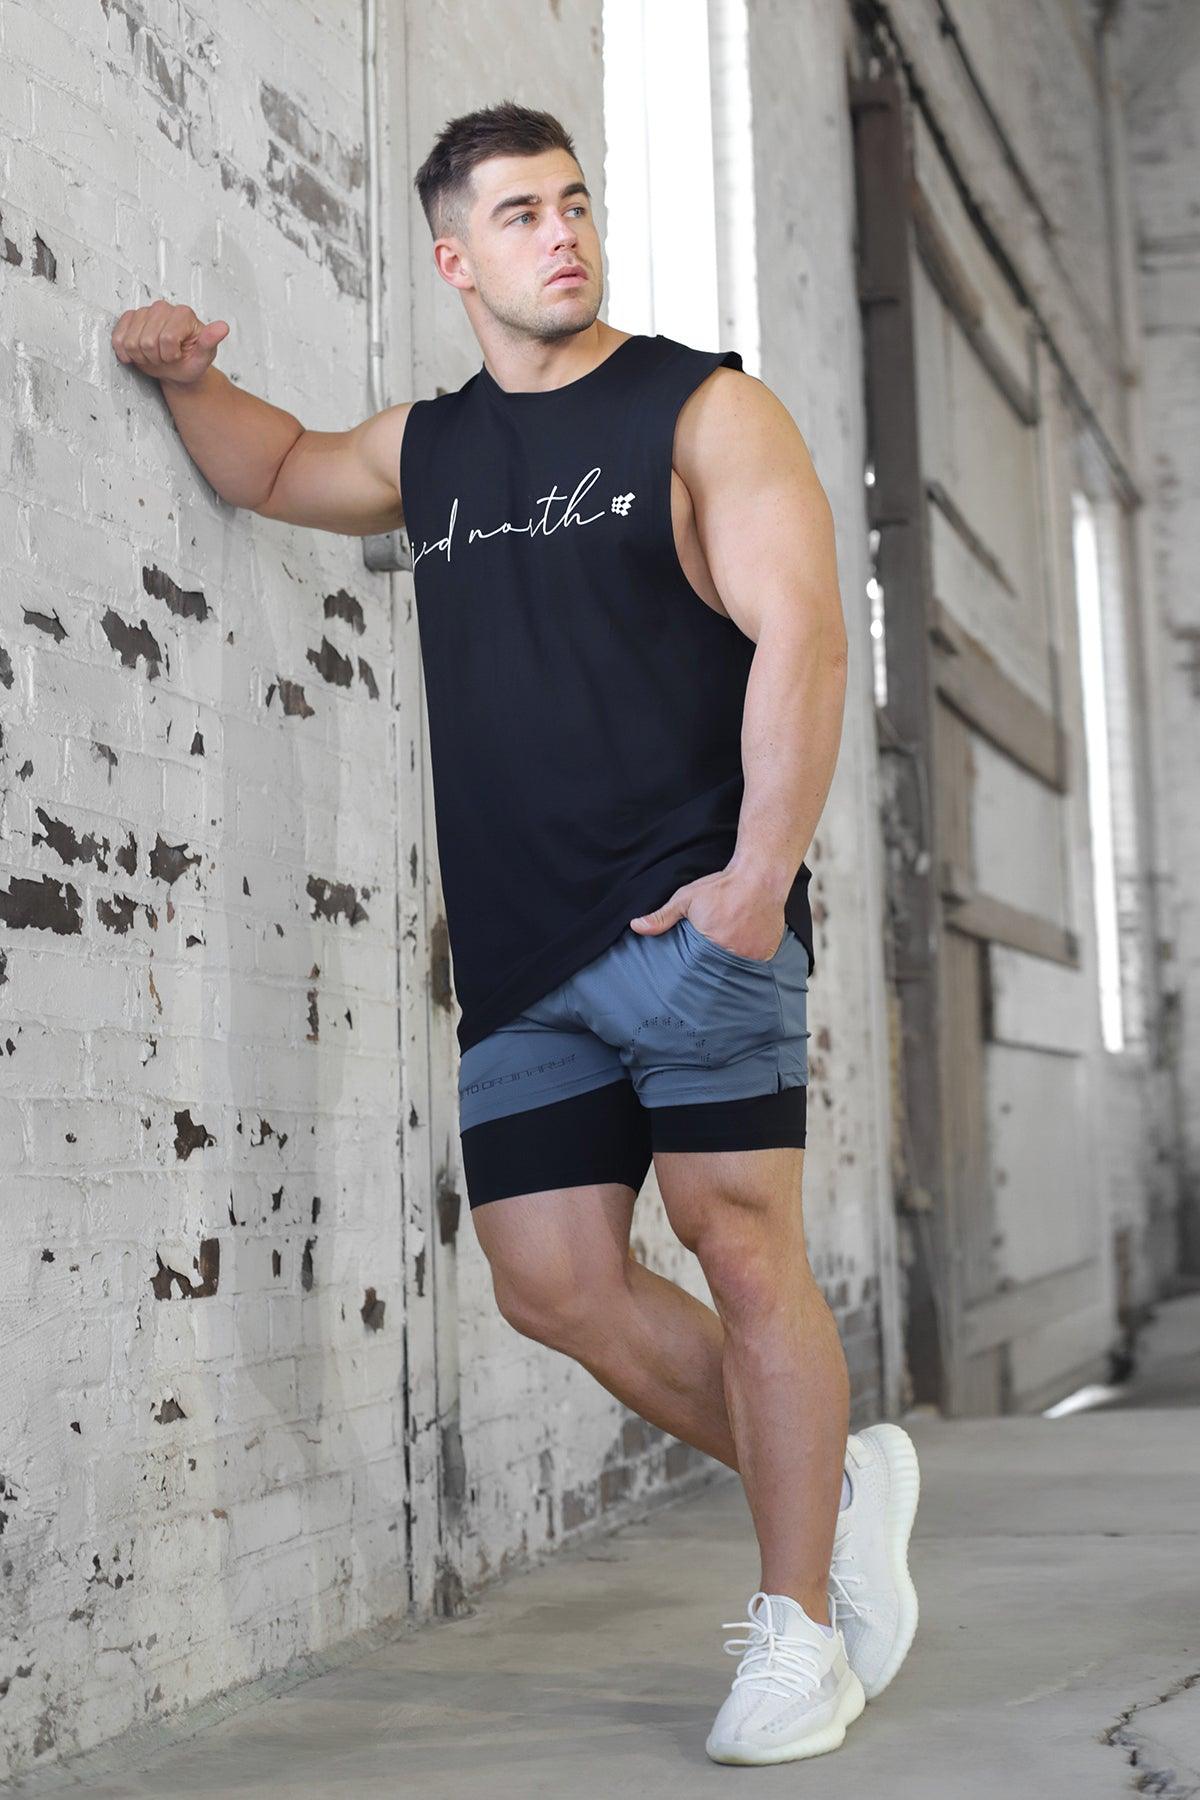 Workout Muscle Tee - Jed North Script - Jed North